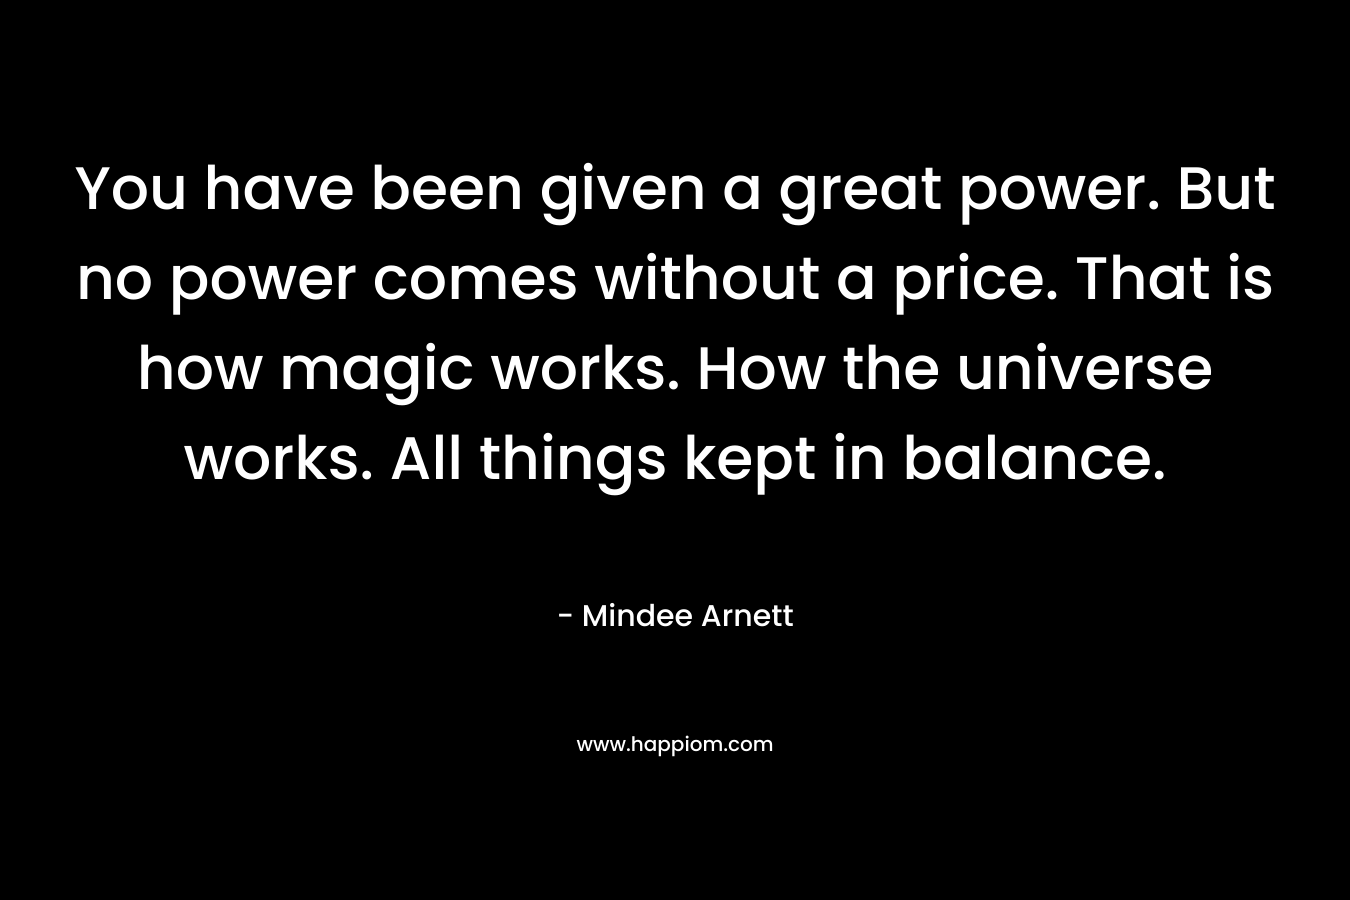 You have been given a great power. But no power comes without a price. That is how magic works. How the universe works. All things kept in balance.